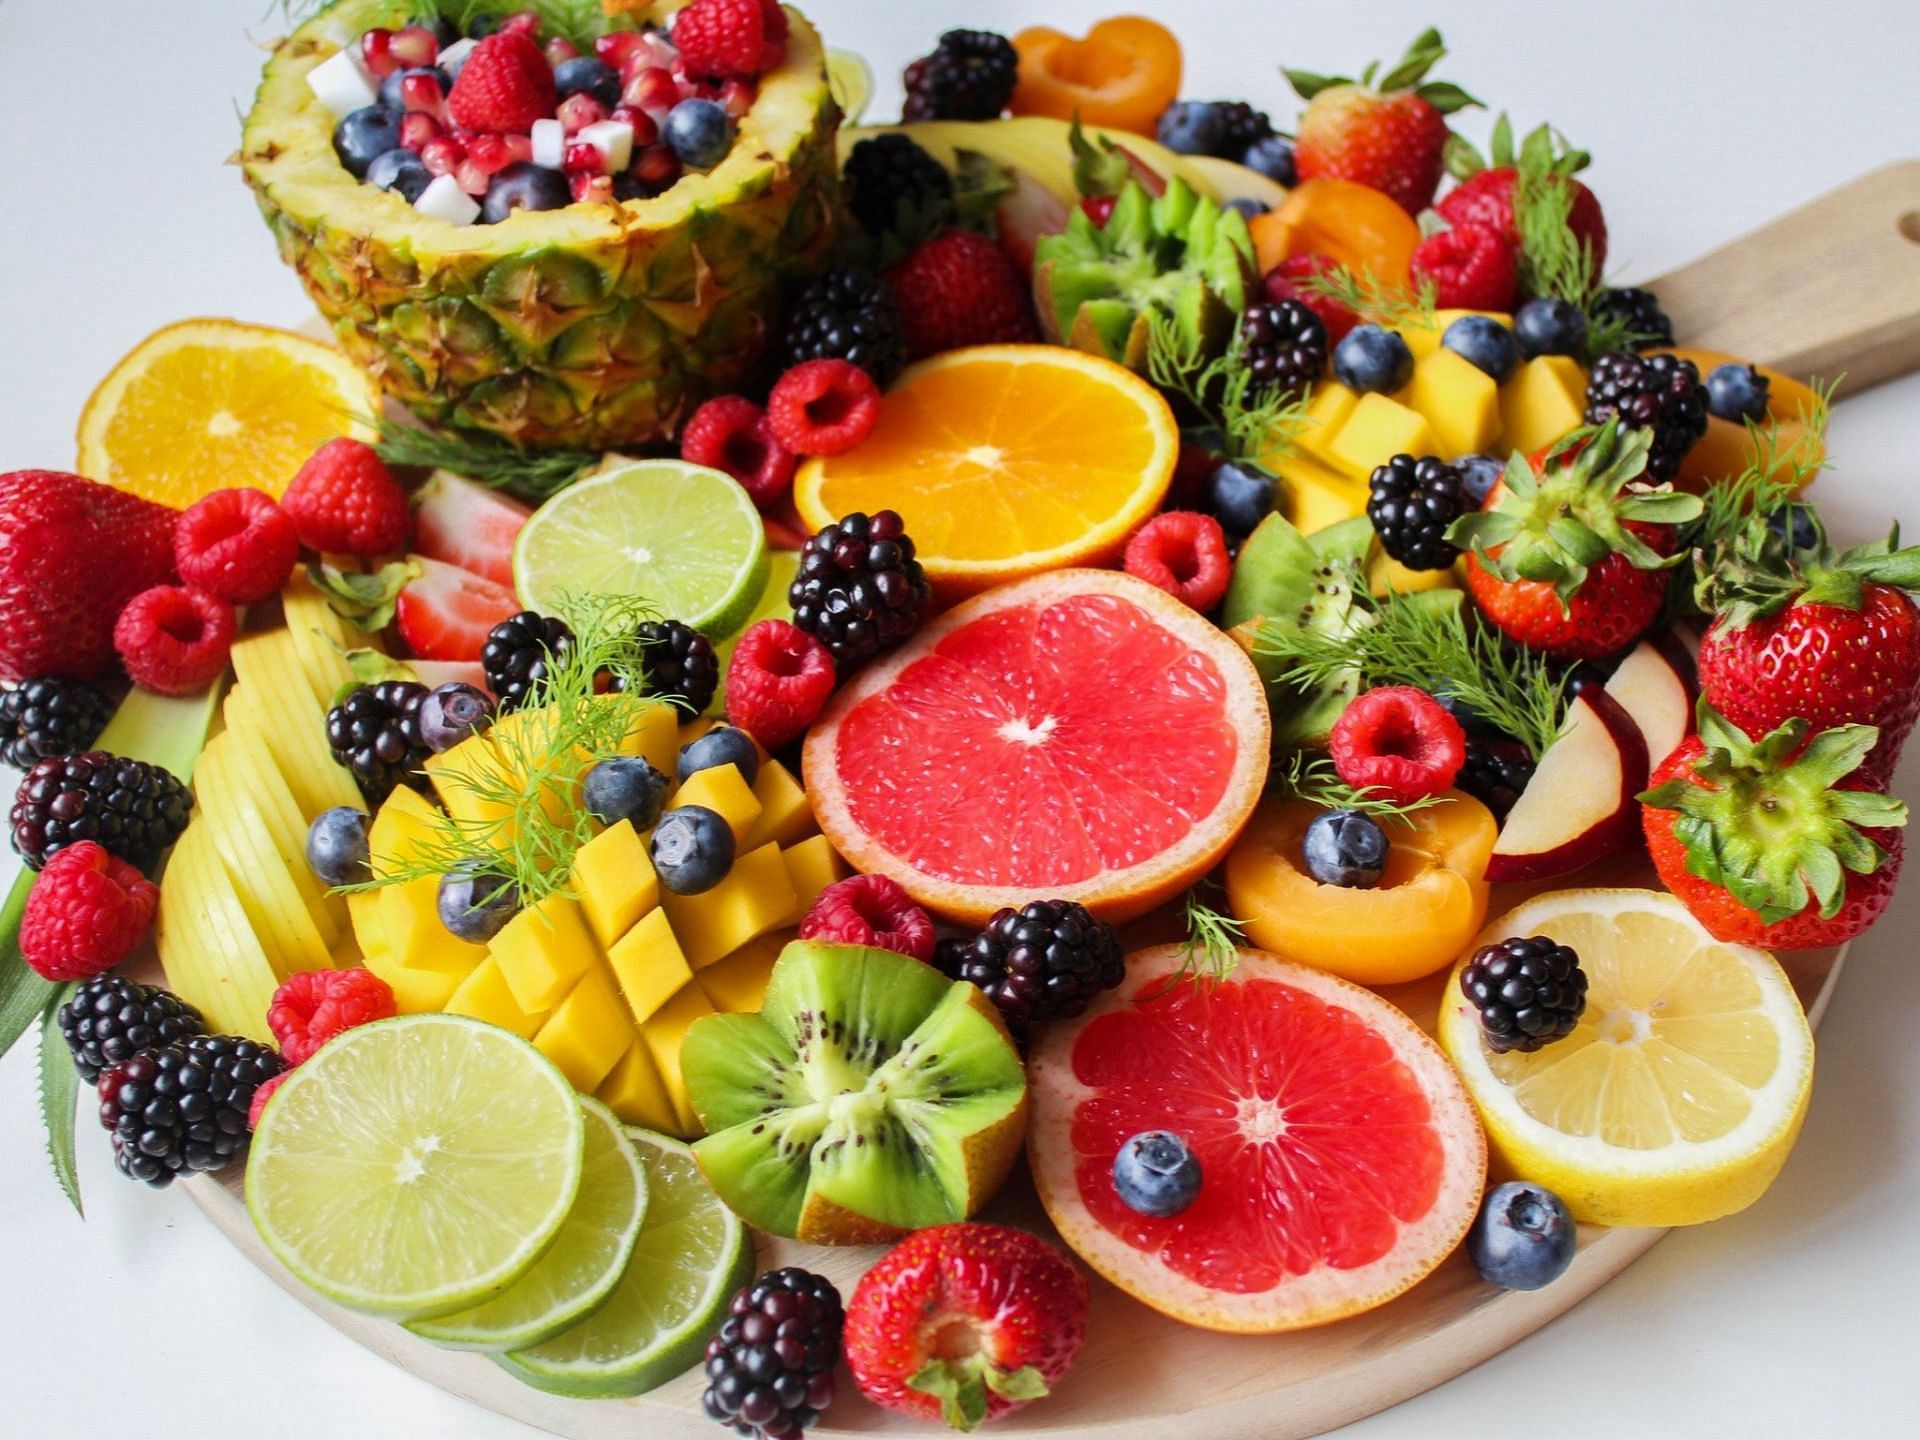 Fruit as a Delicious and Convenient Way to Add More Plant-Based Foods to Your Diet (Image via Pexels)